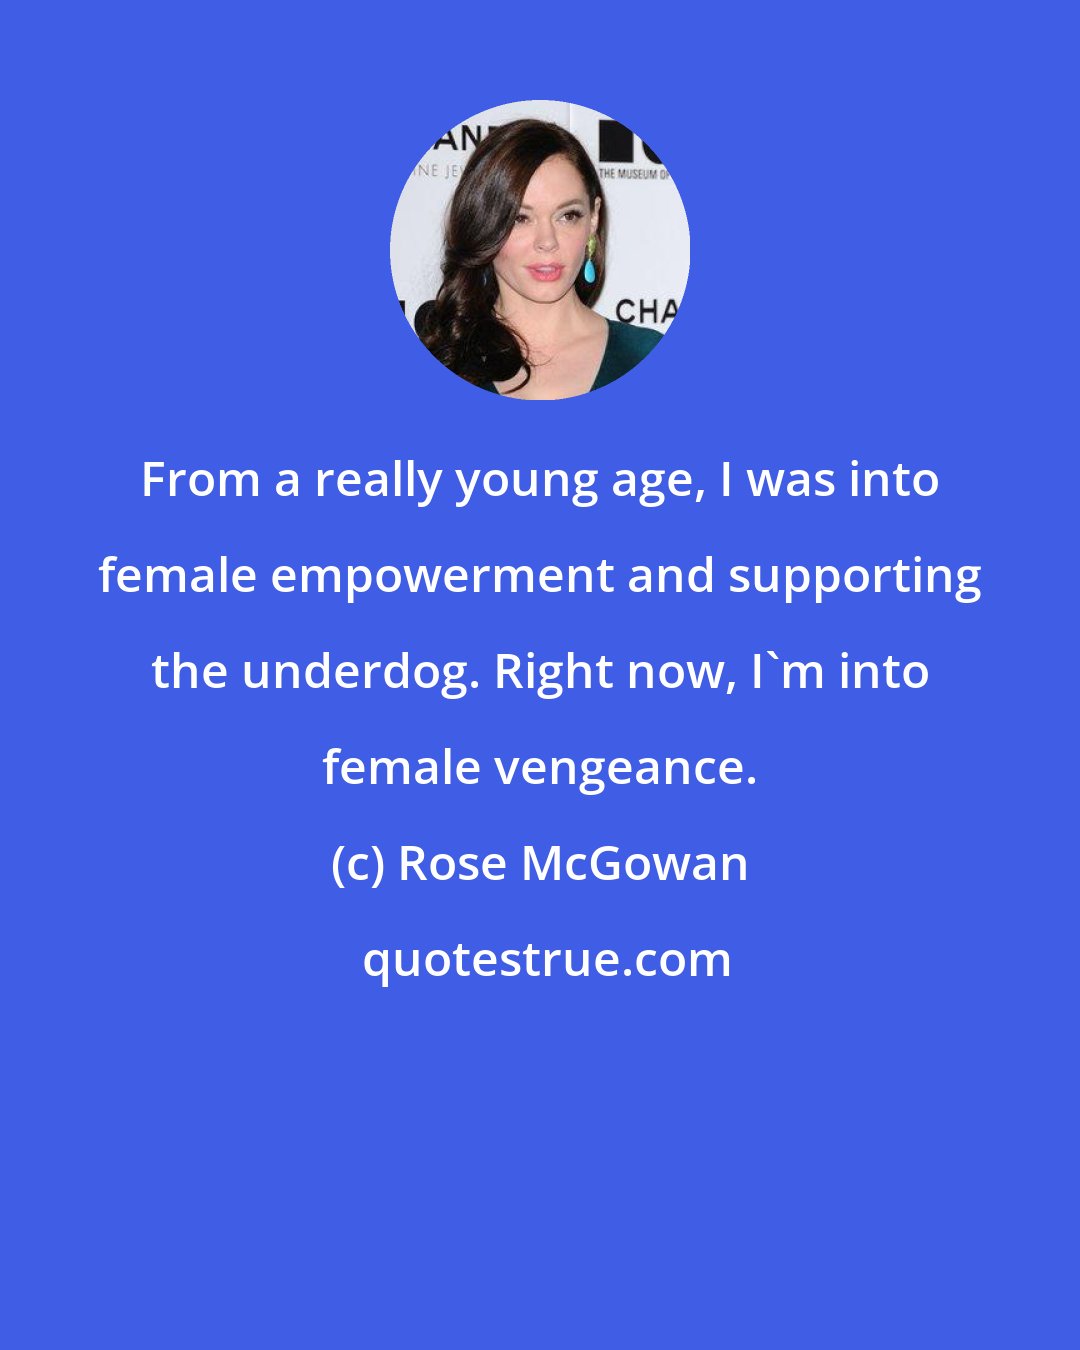 Rose McGowan: From a really young age, I was into female empowerment and supporting the underdog. Right now, I'm into female vengeance.